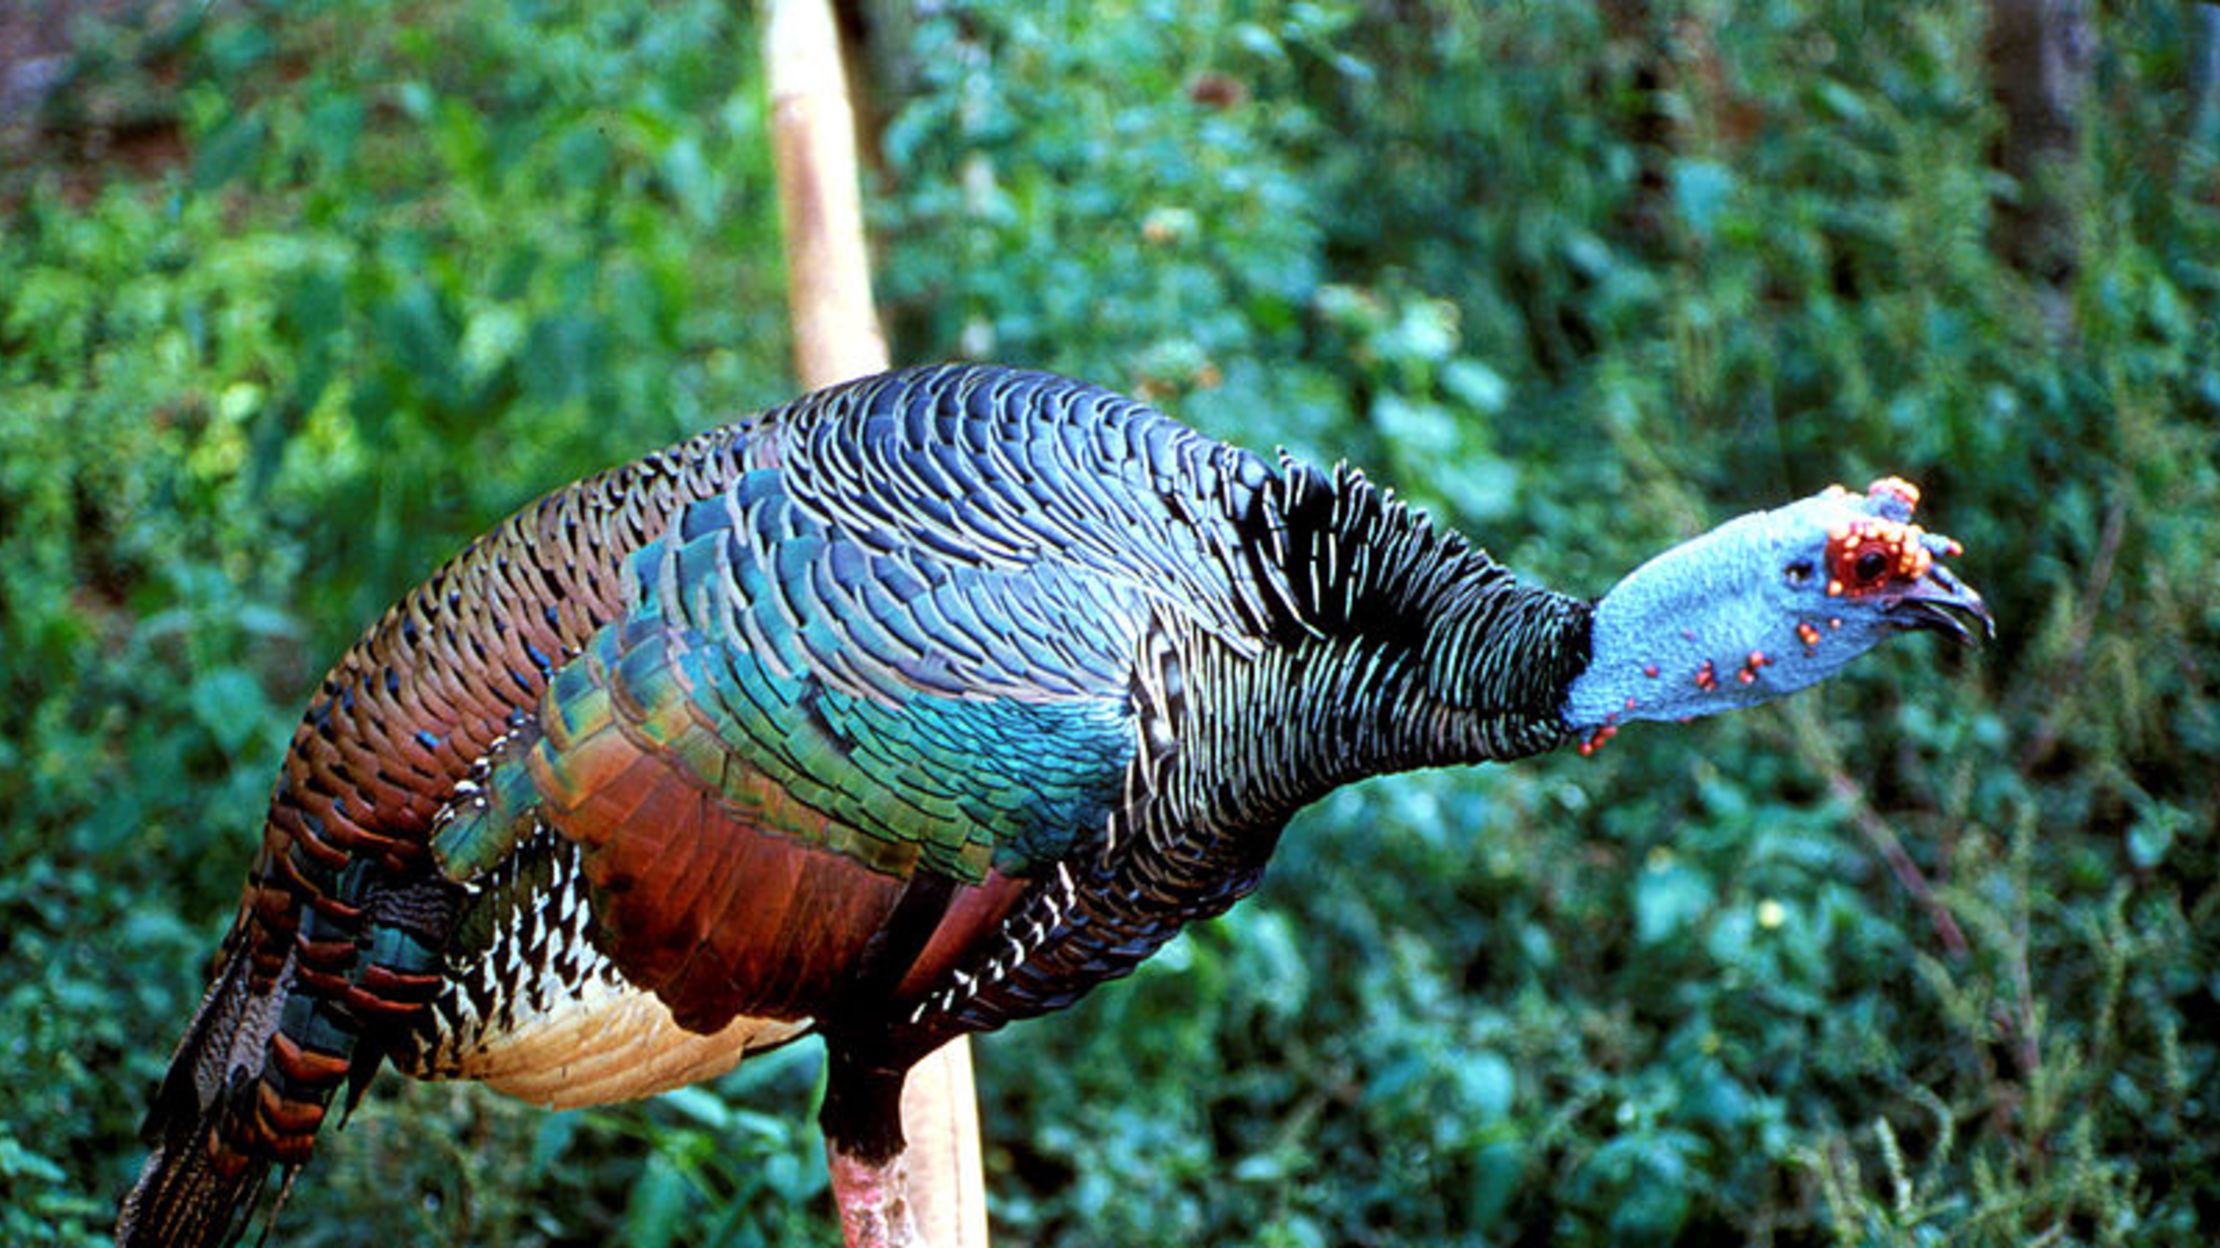 Get to Know the Turkey Species You Don't Eat | Mental Floss